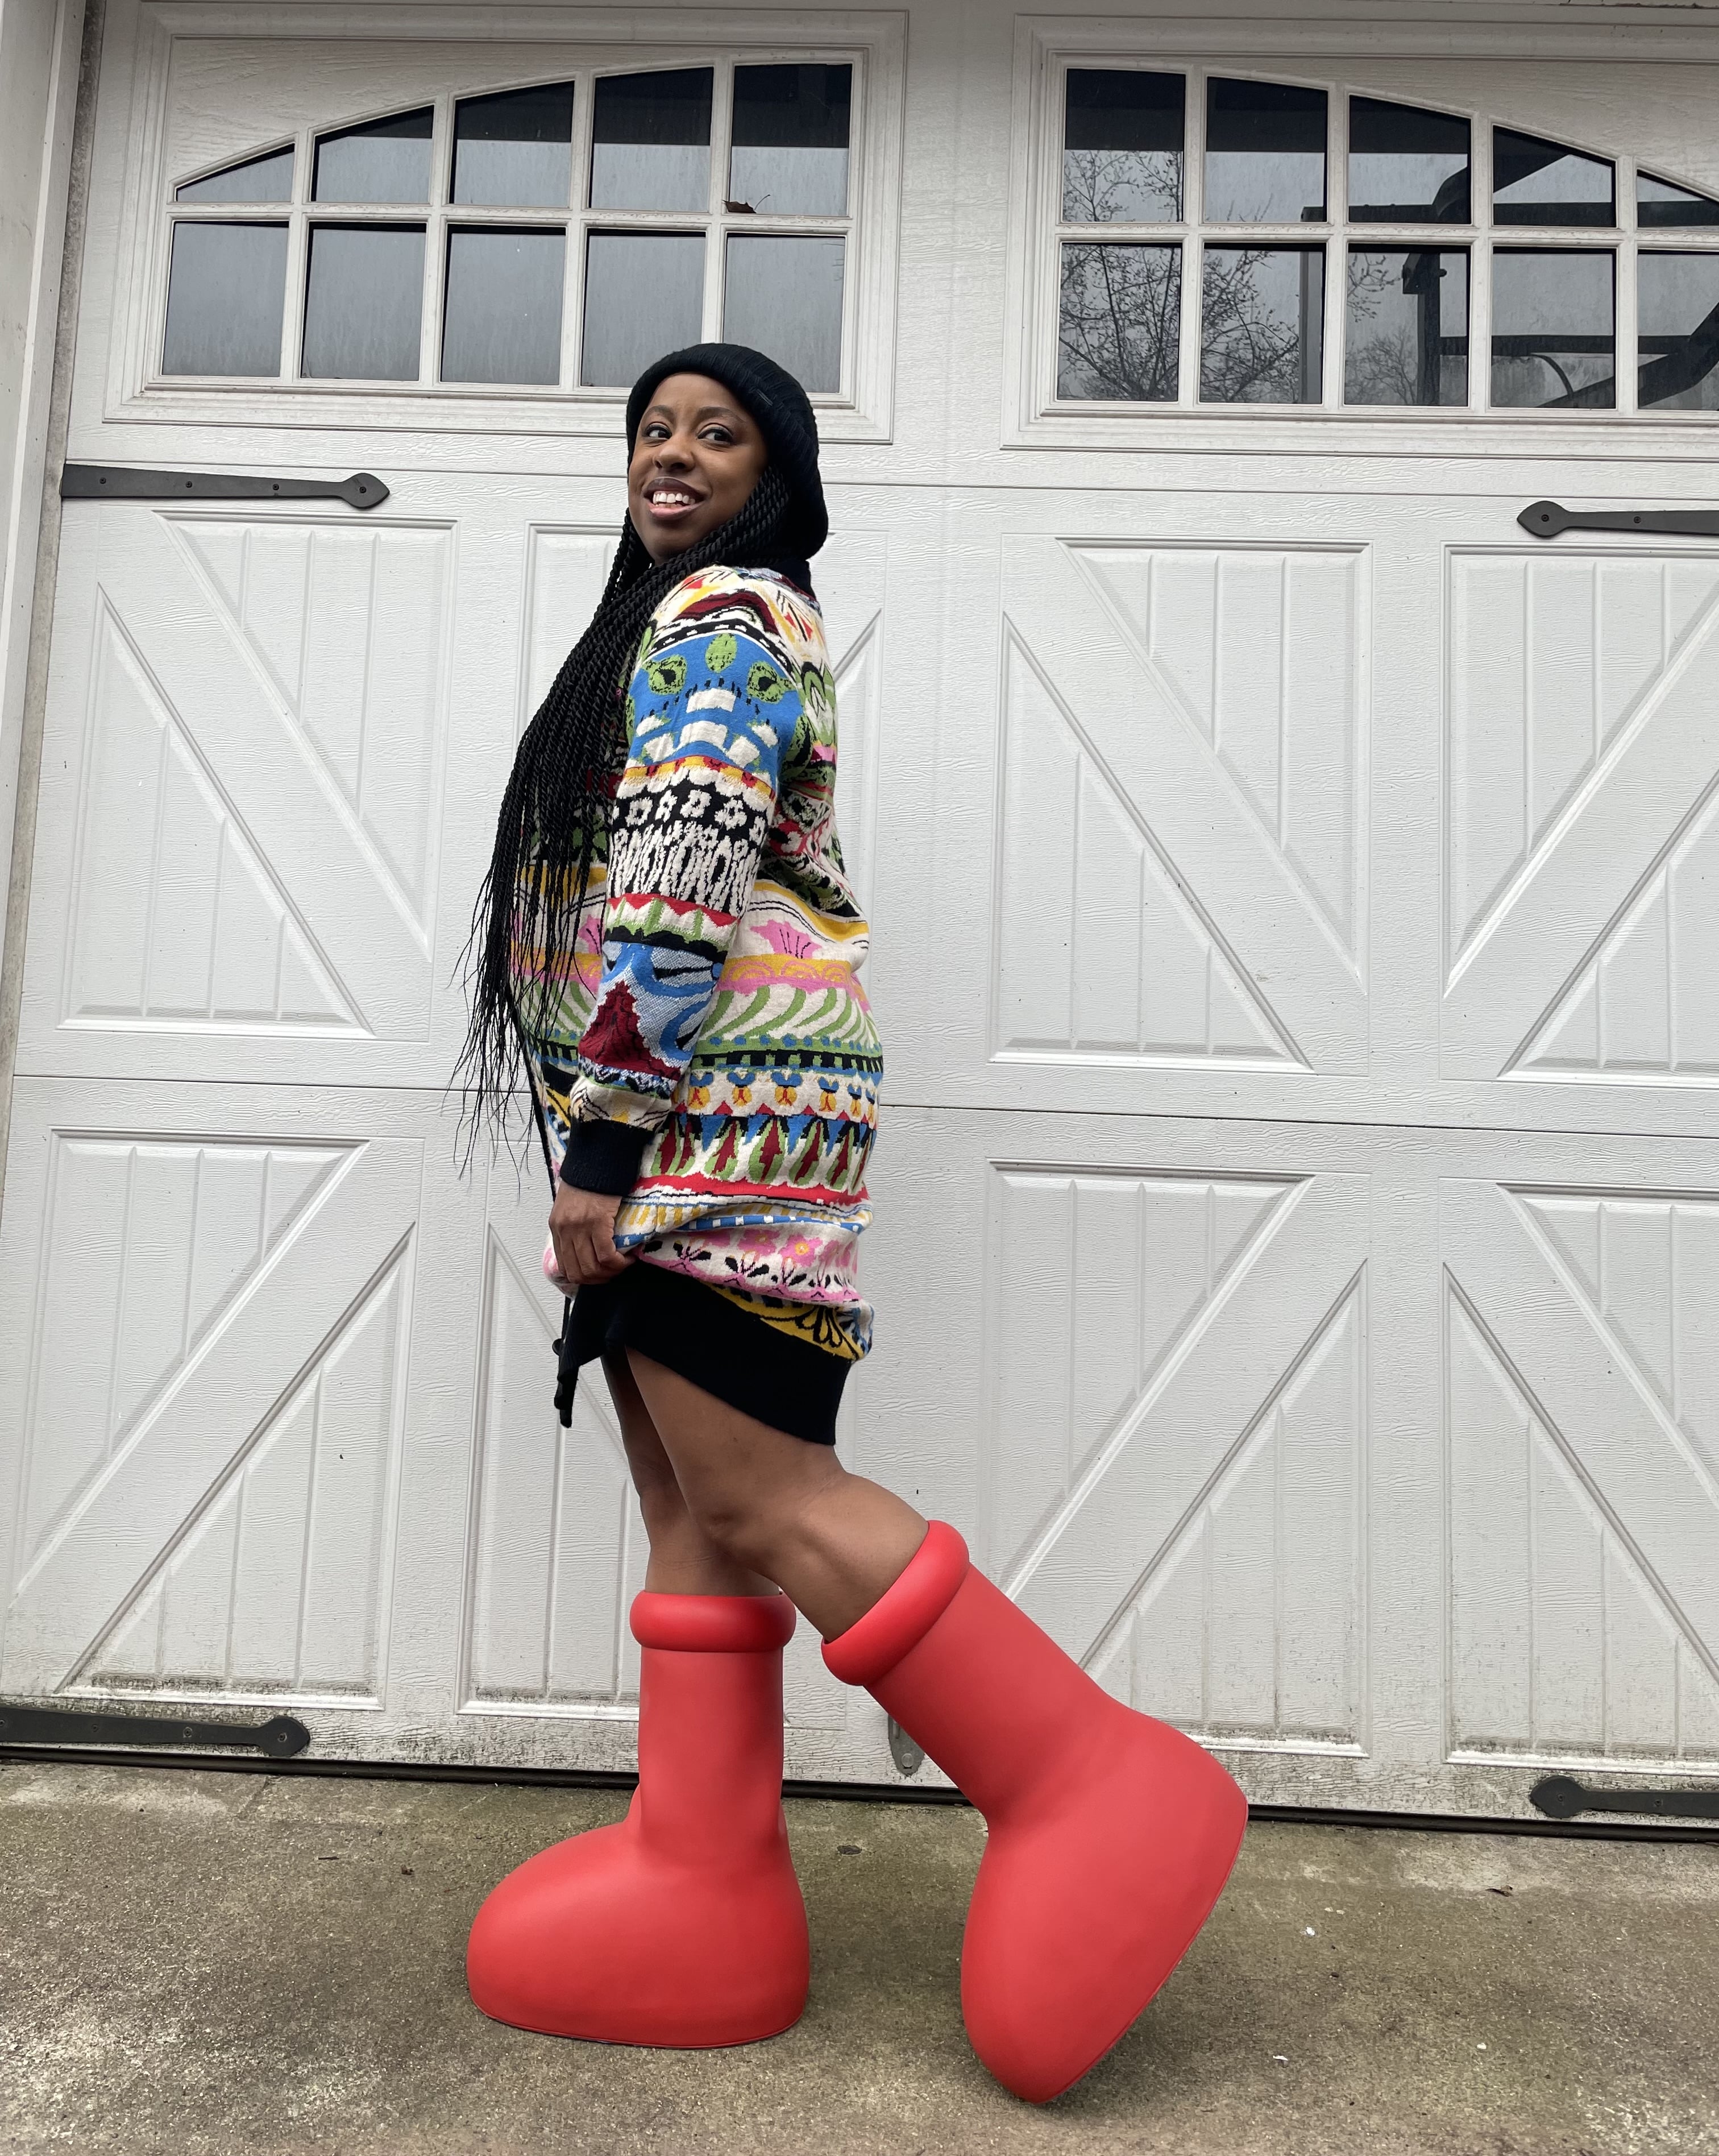 I wore the MSCHF Big Red Boots': Everything you need to know